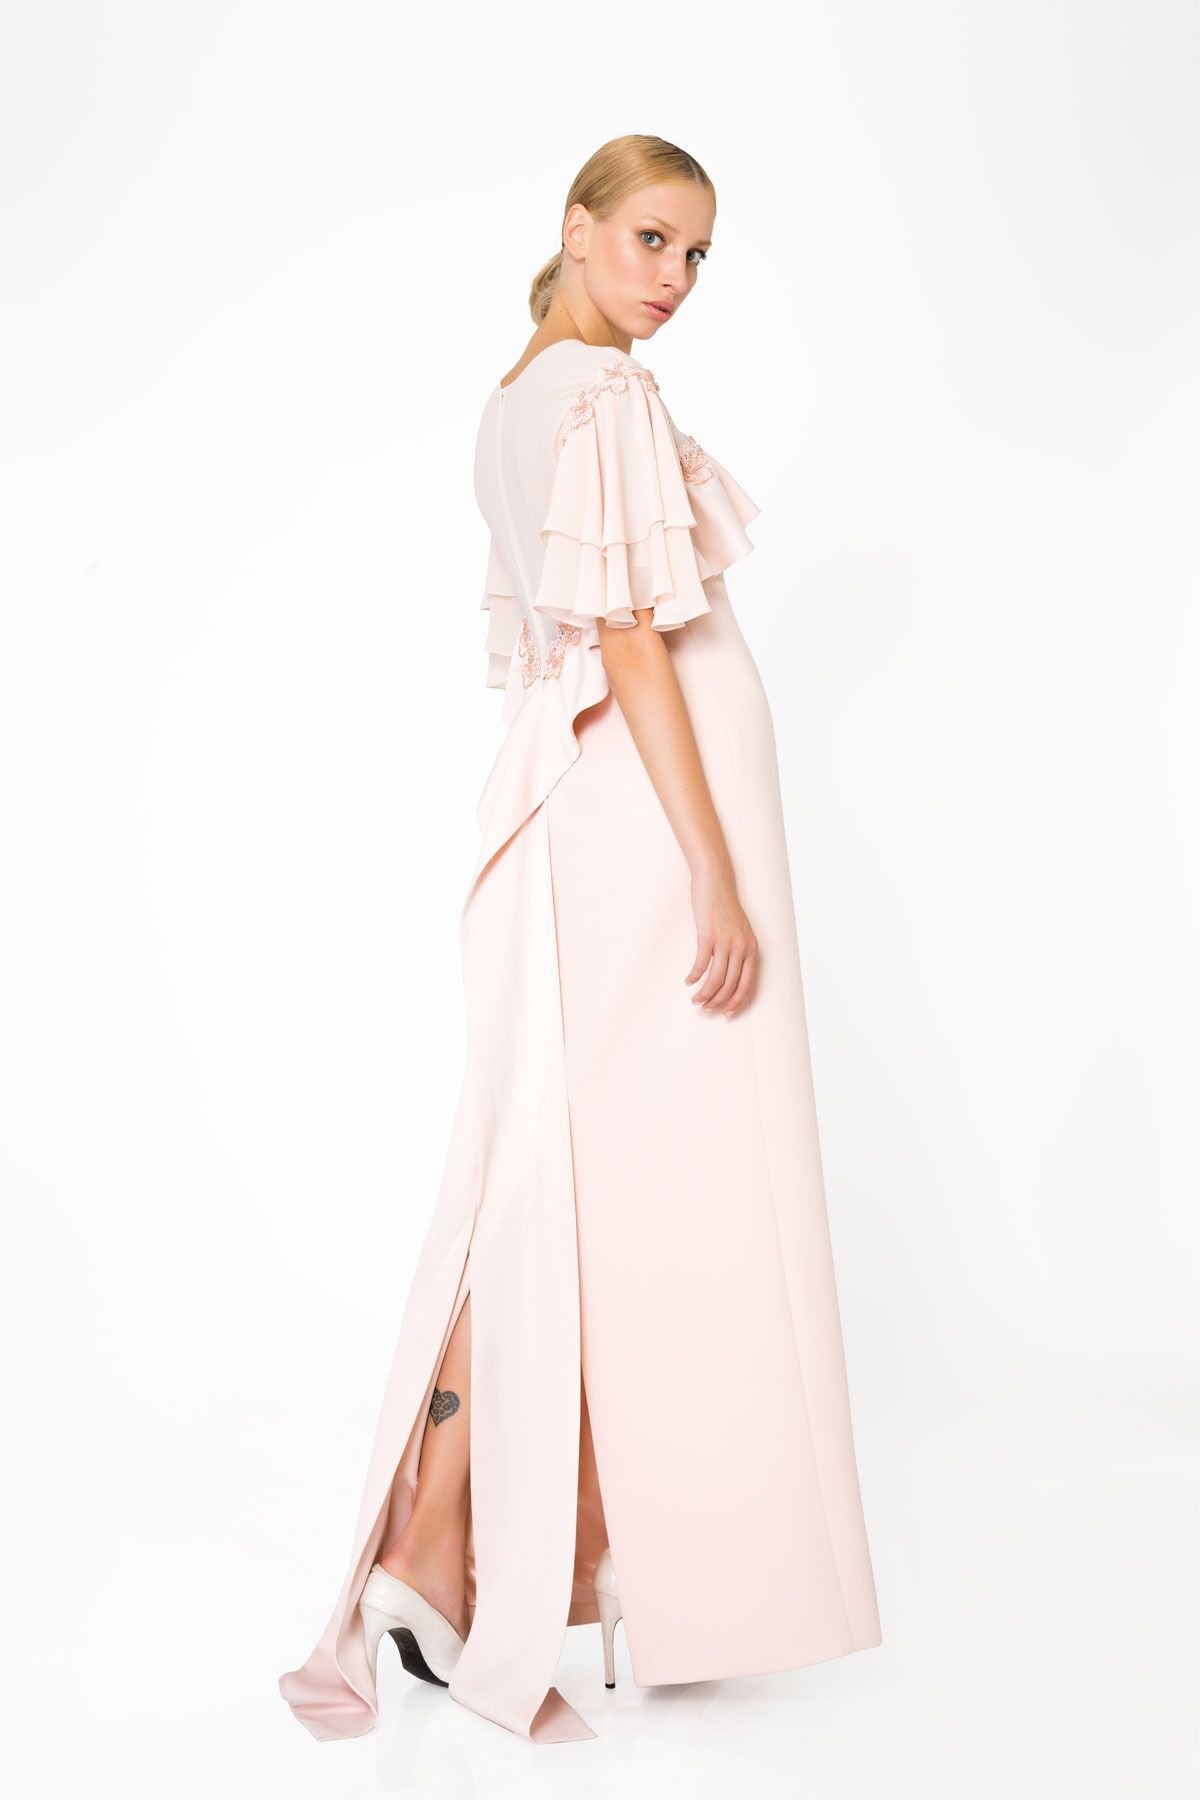 Chiffon And Lace Detailed Salmon Color Evening Dress